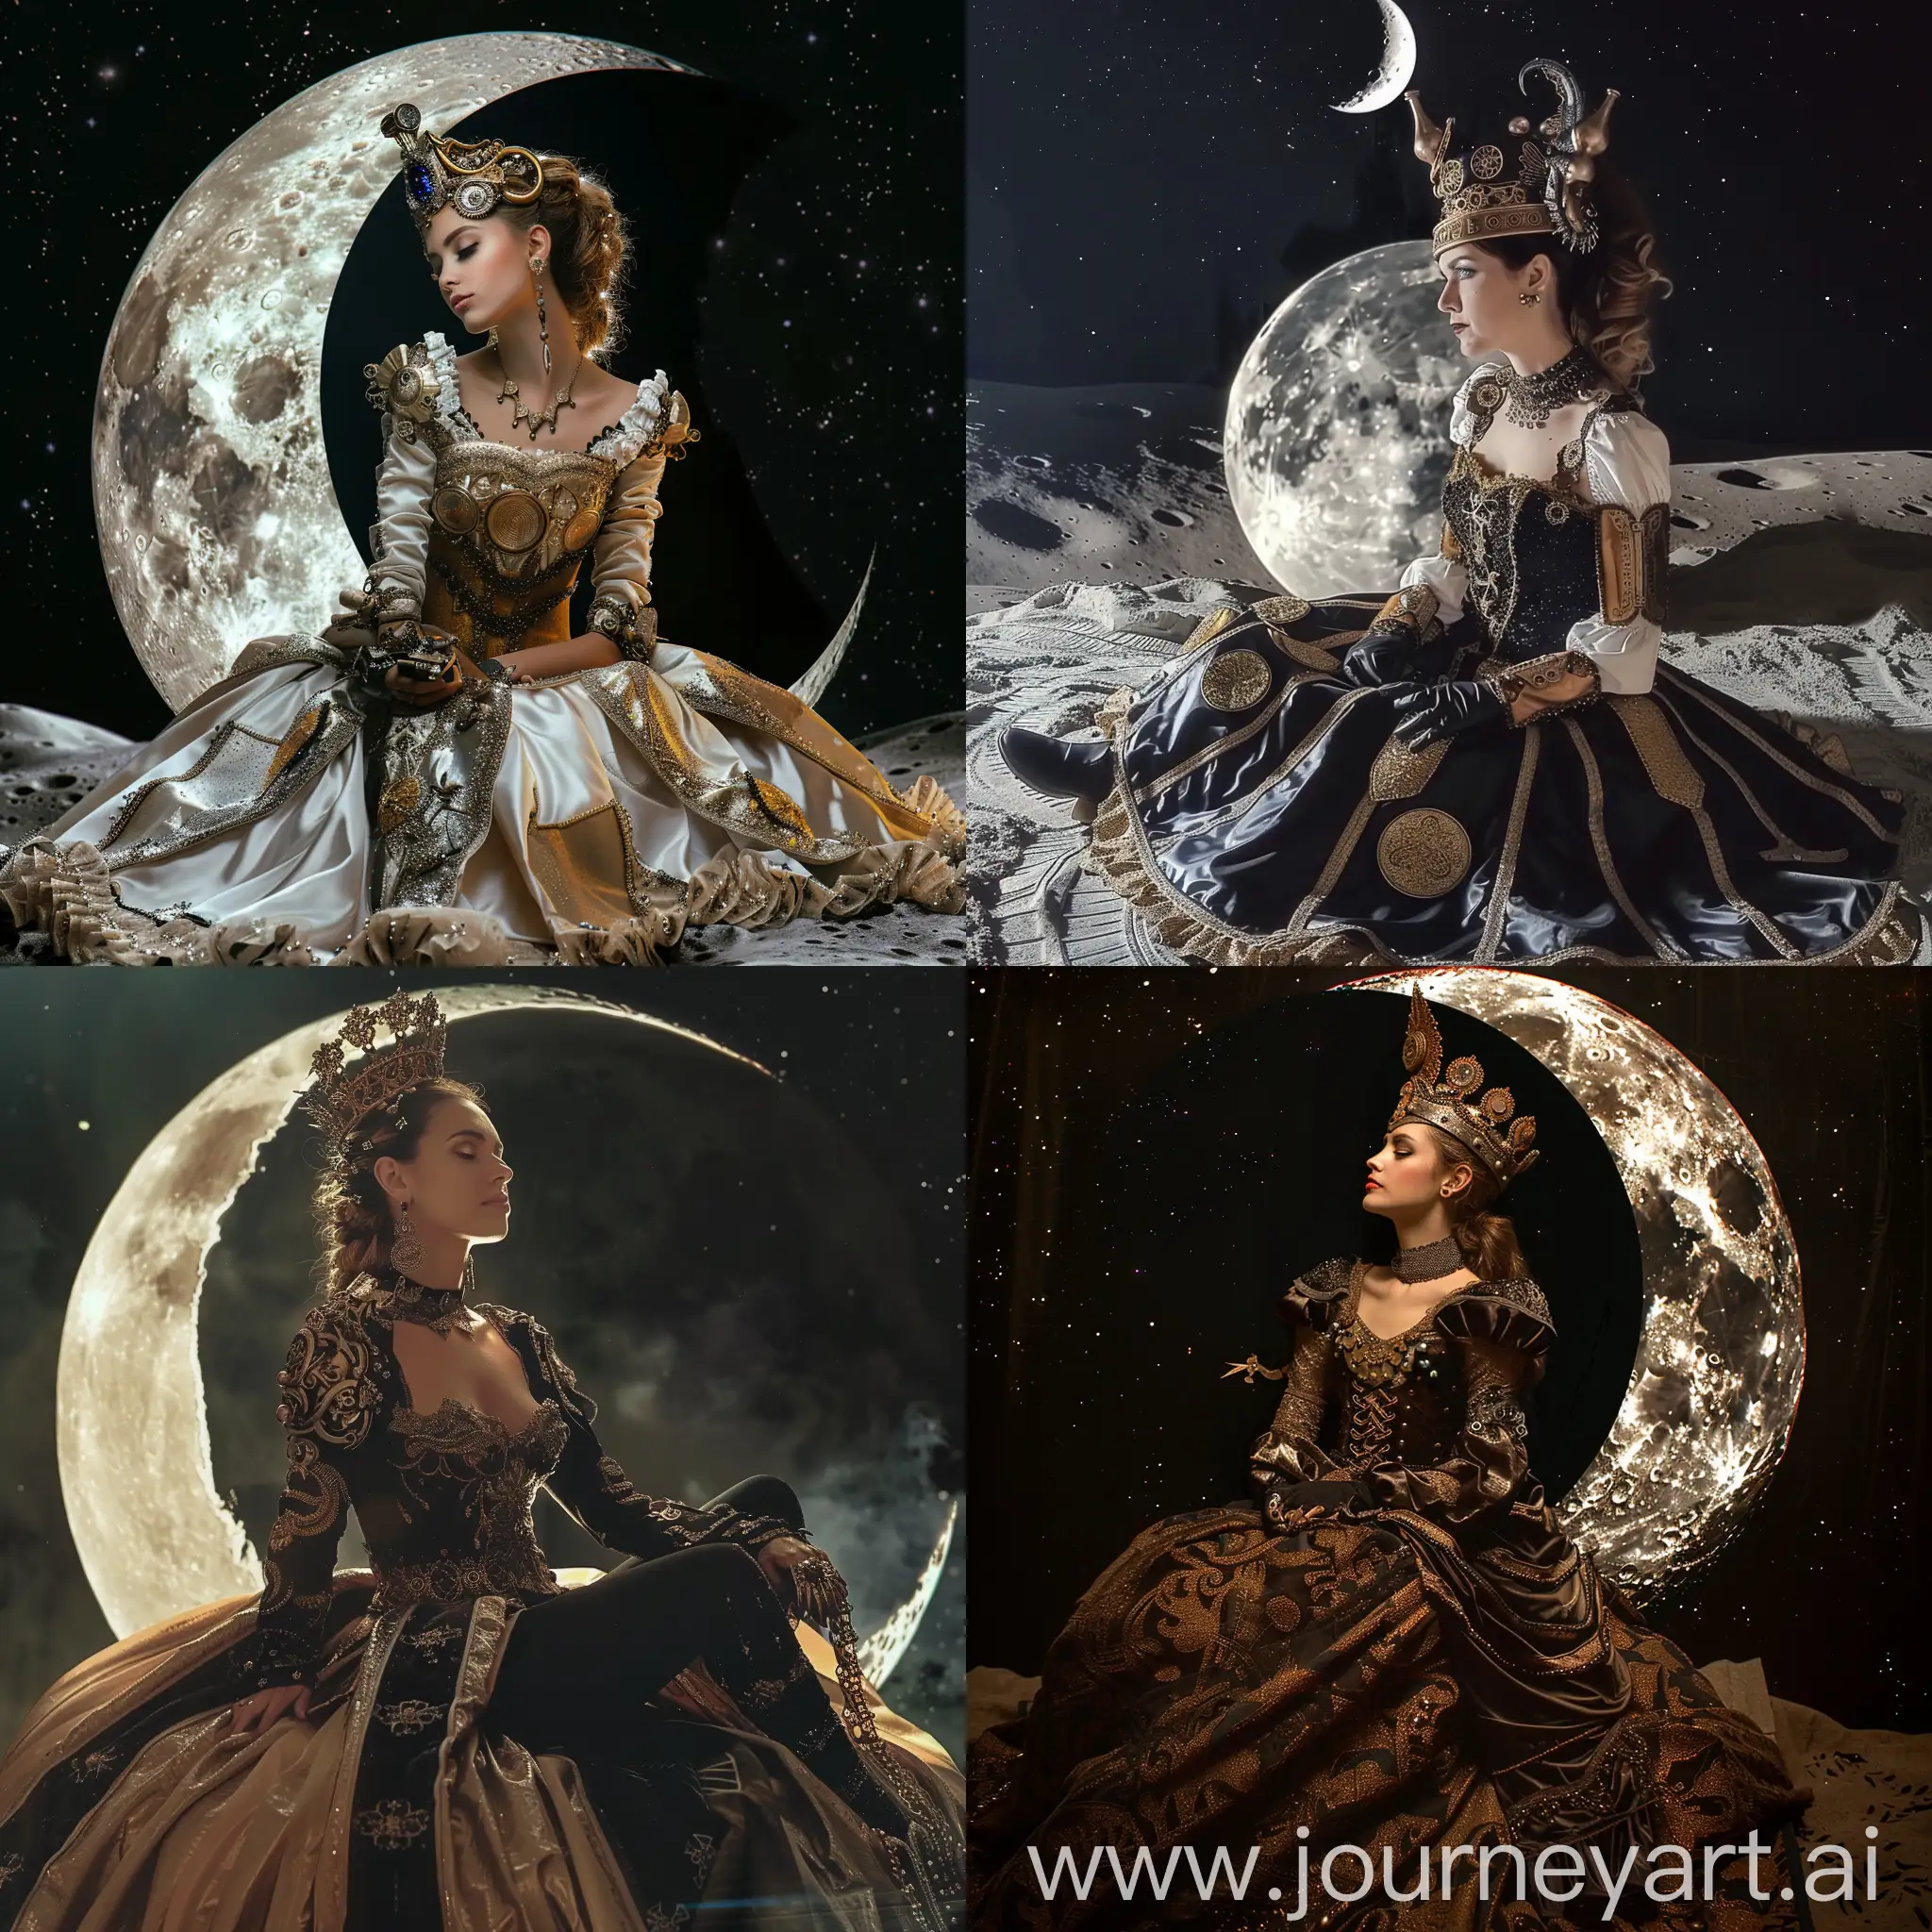 Medieval-Steampunk-SciFi-Queen-Sitting-on-the-Moon